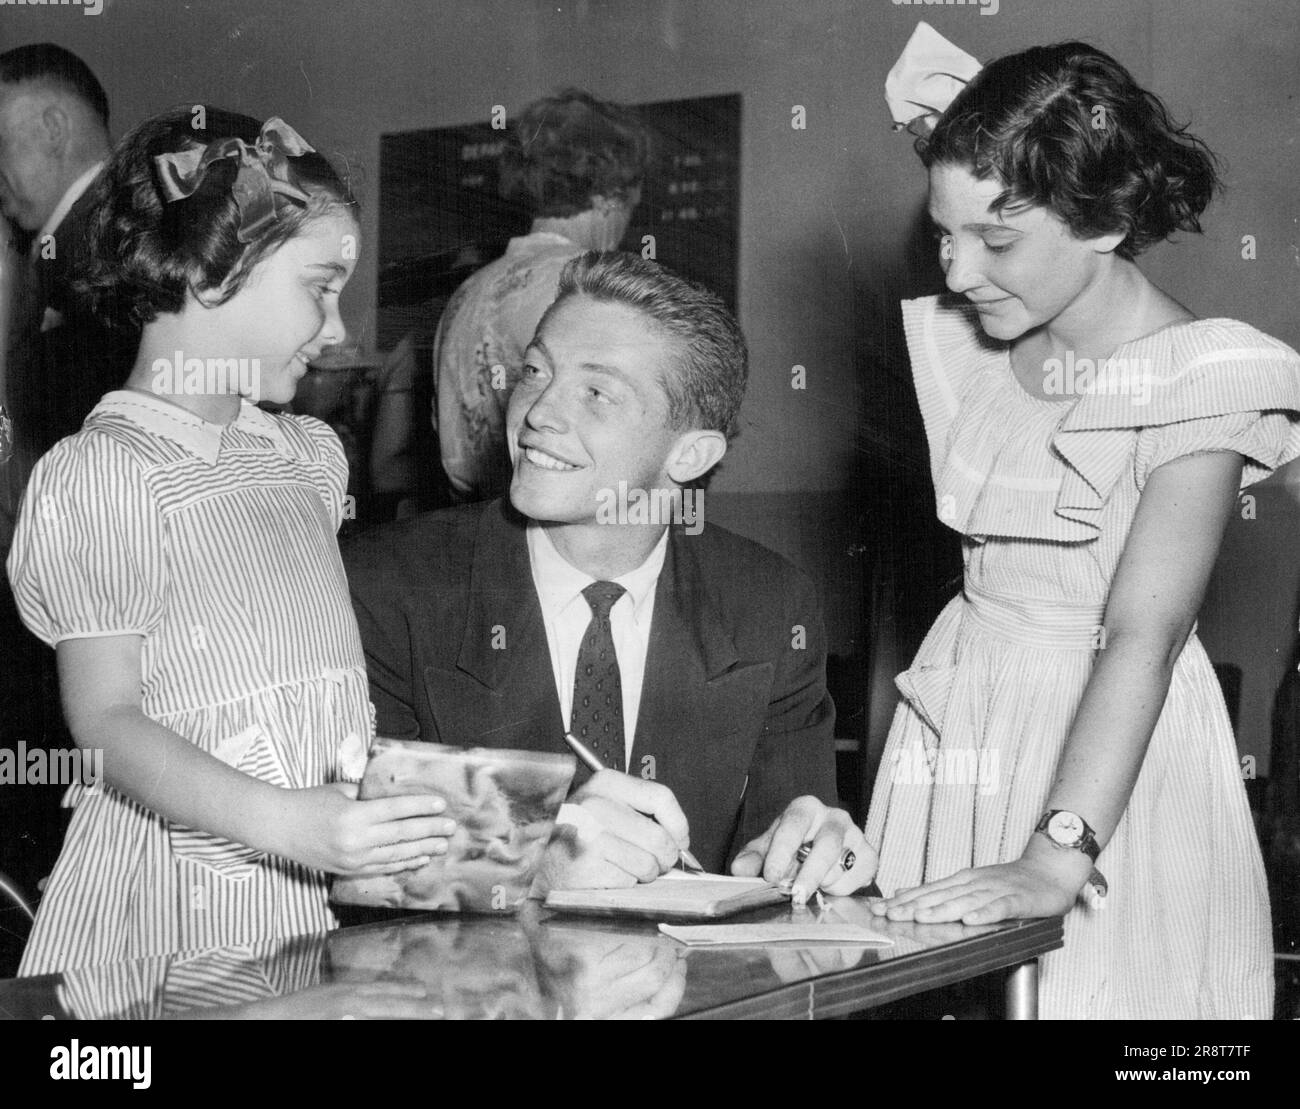 US Tennis team leaves -- US Tennis player Tony Trabert signs autographs for Kathryn (left) and Diane Humphrey before leaving for the United States with the Davis cup team this morning. Kathryn and Diane are the daughters of Ted Humphrey, the man who offered Sedgeman £40,000 to turn professional. January 02, 1952. (Photo by Stuart William MacGladrie/Fairfax Media). Stock Photo